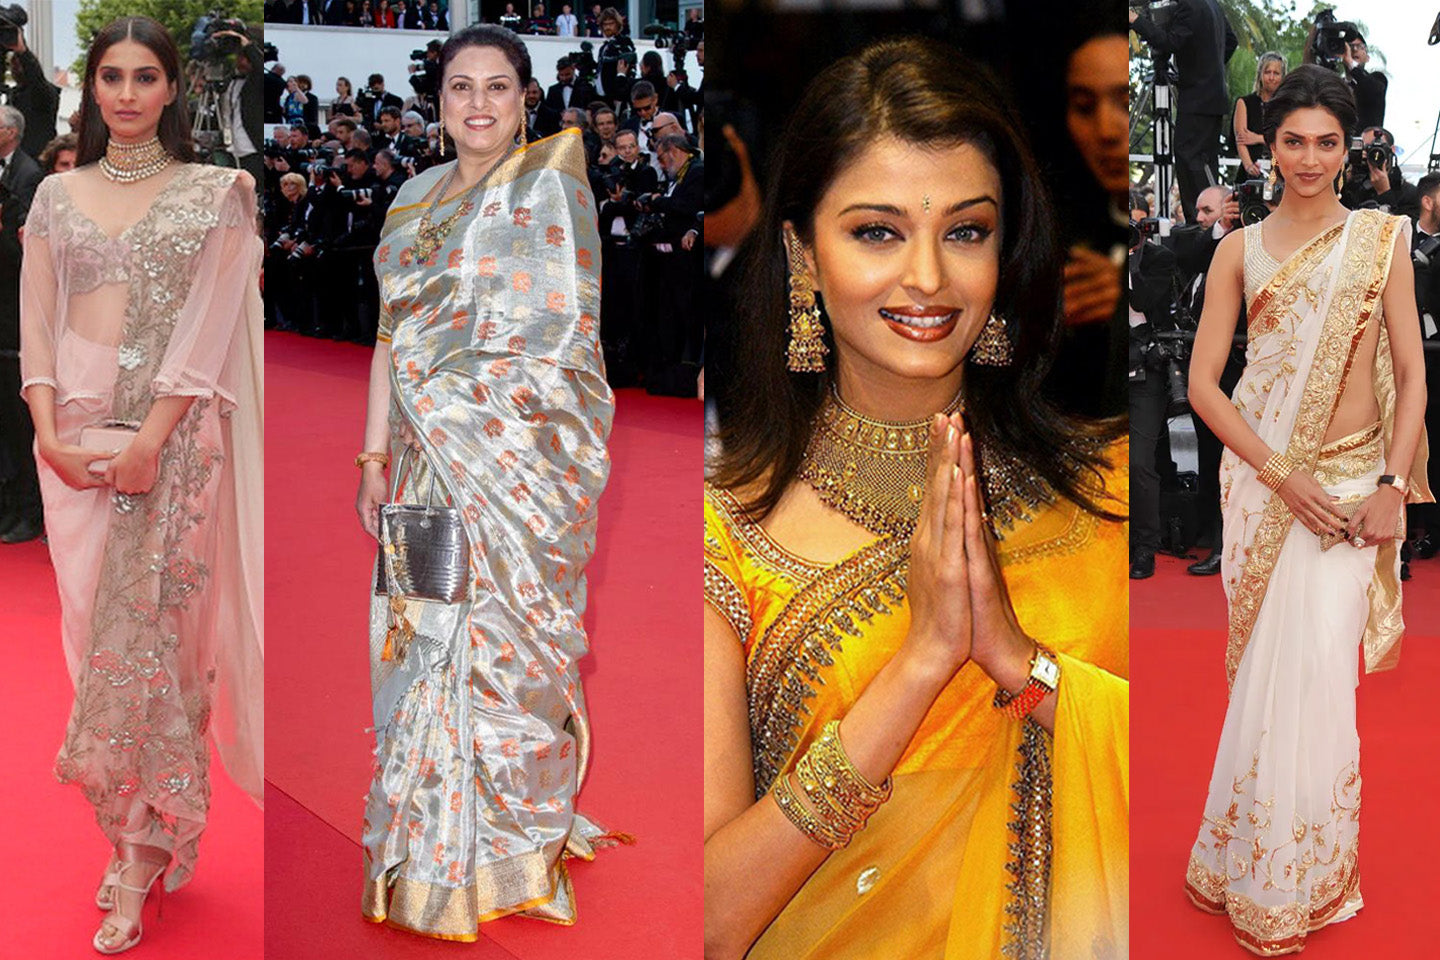 India at Cannes: All the Best Indian Looks Over the Years